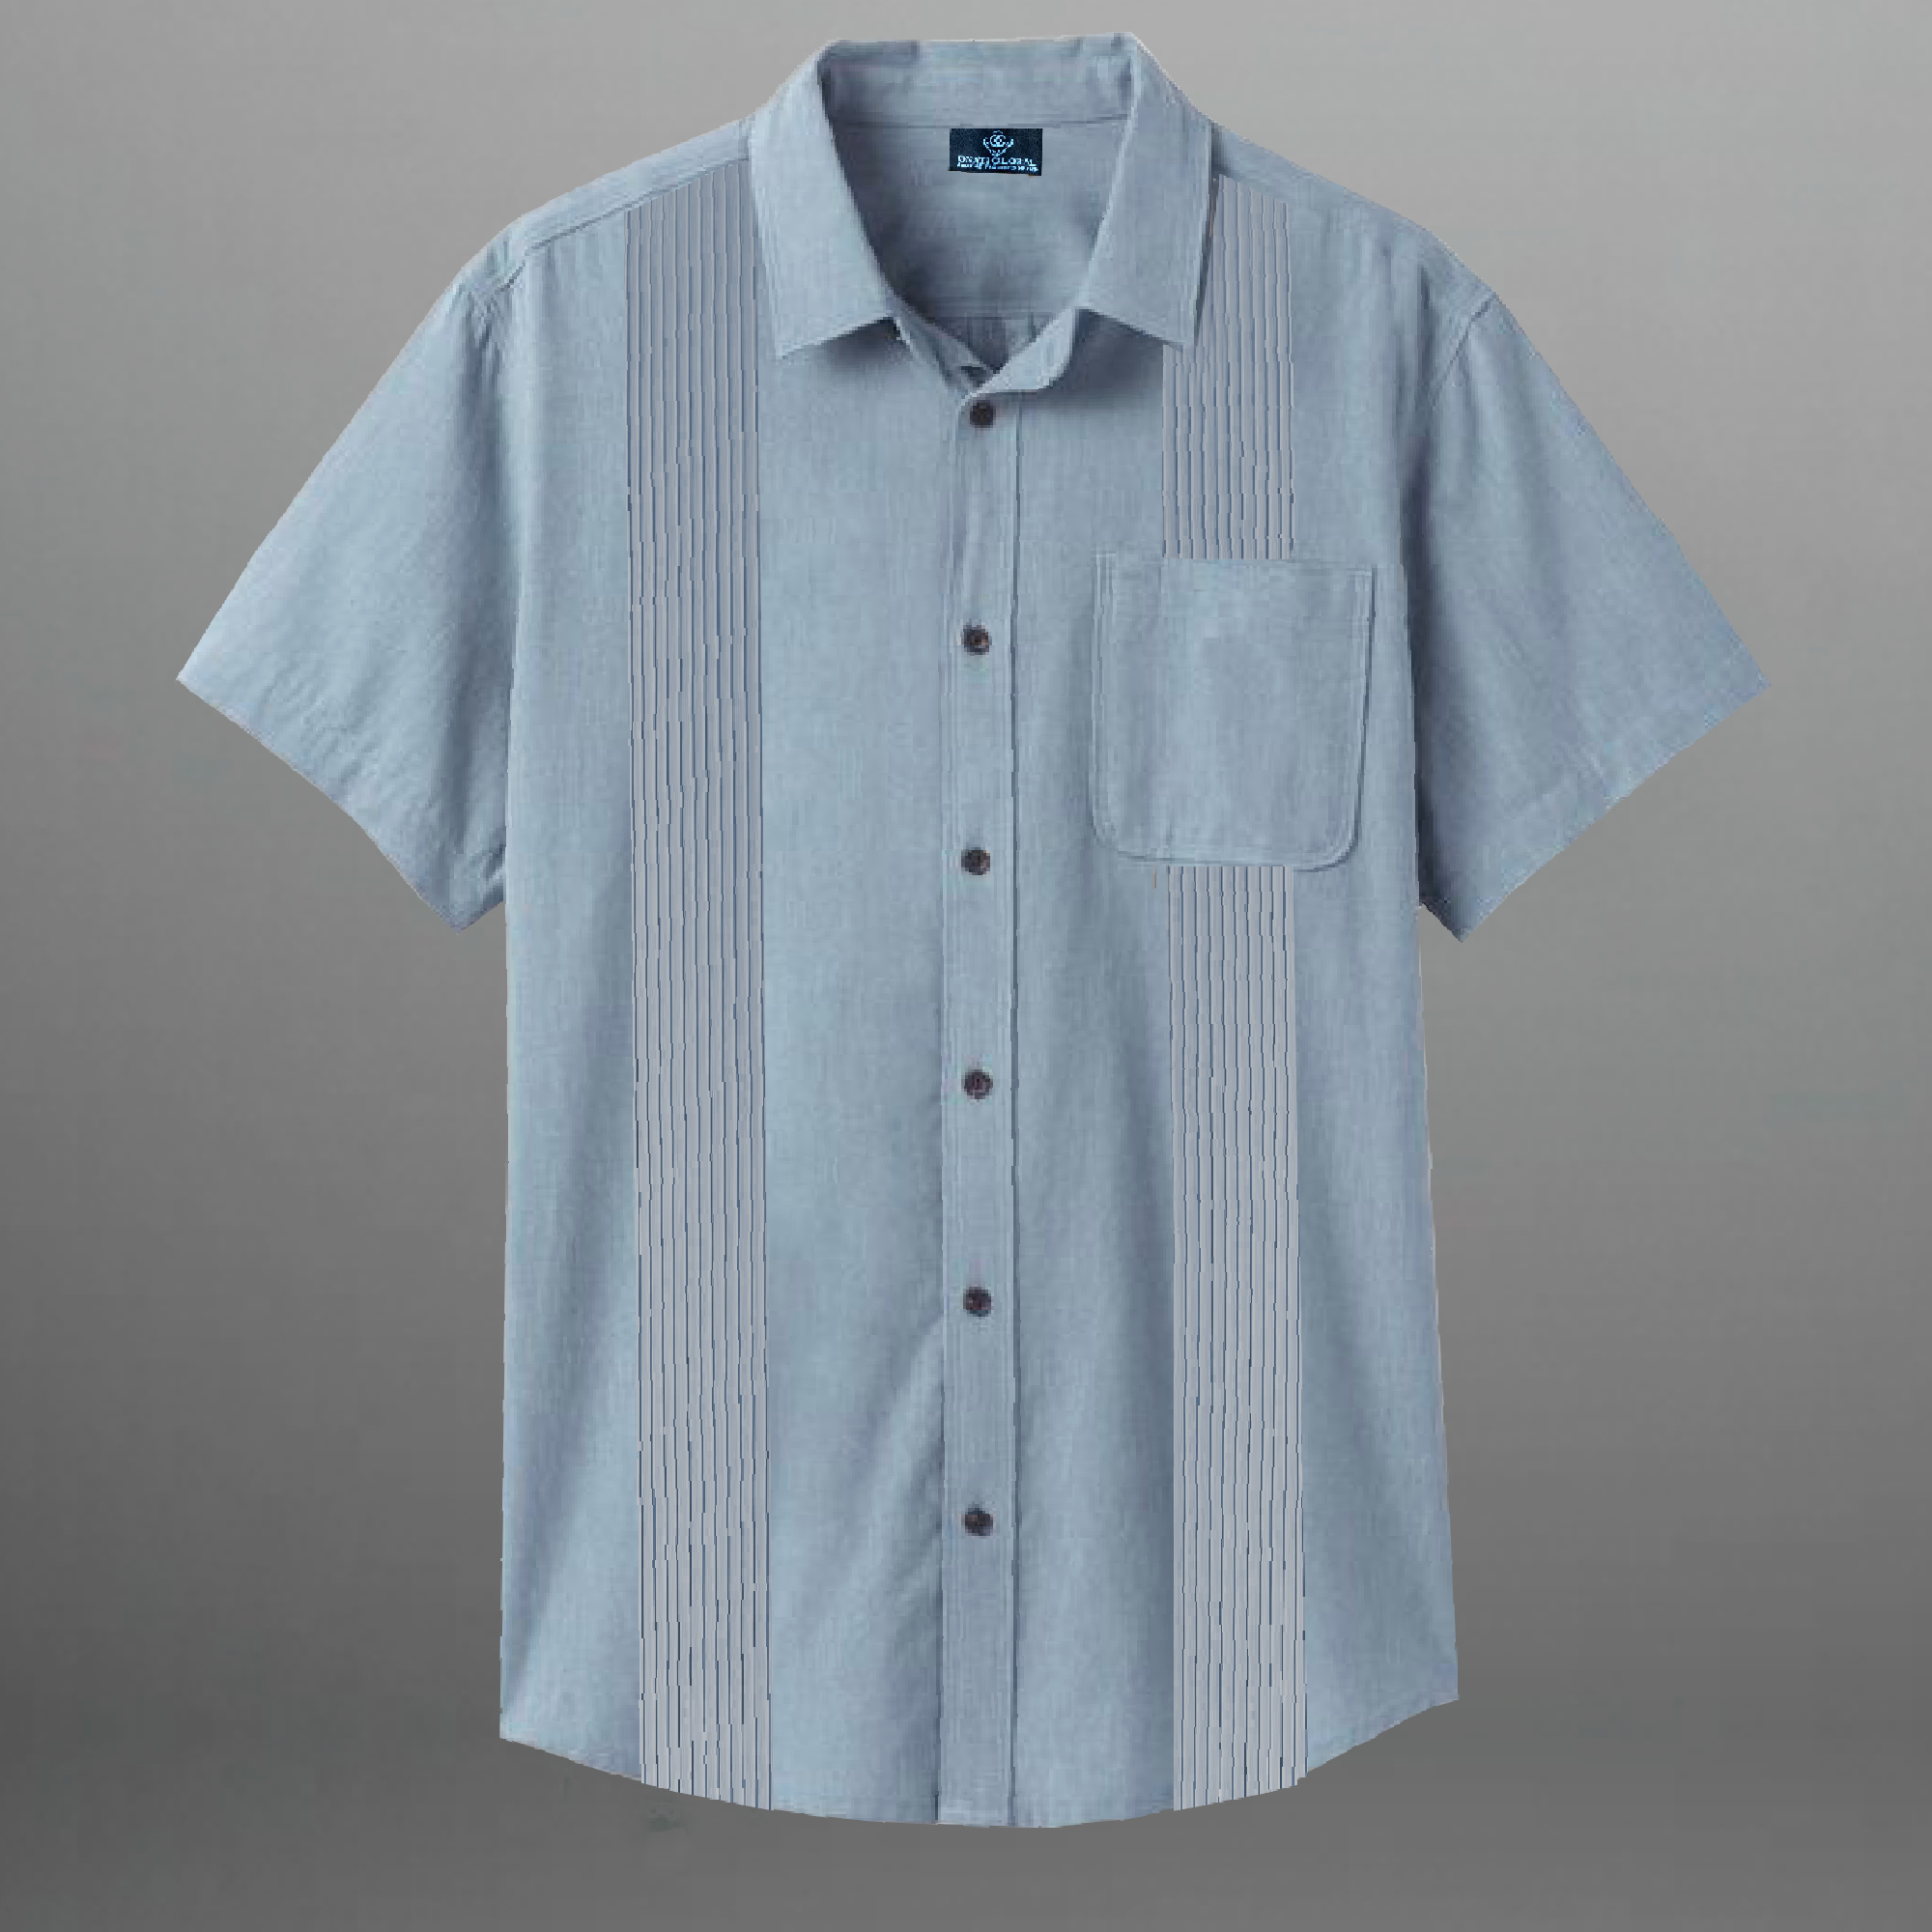 Men's Blue Half Sleeve Shirt with Pleated details and one side pocket-RMS042